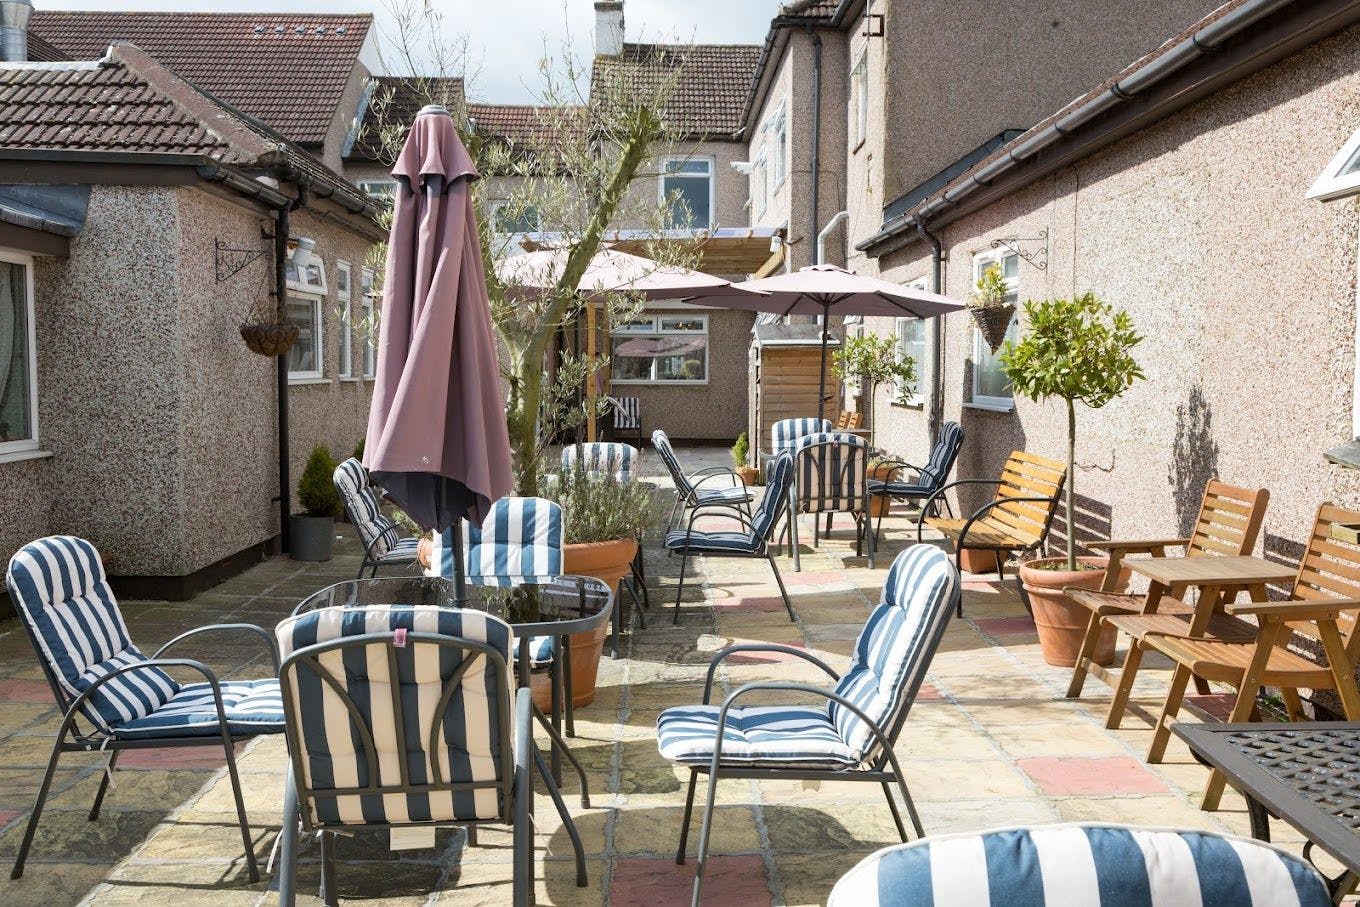 Garden of Belmont Lodge care home in Chigwell, Essex